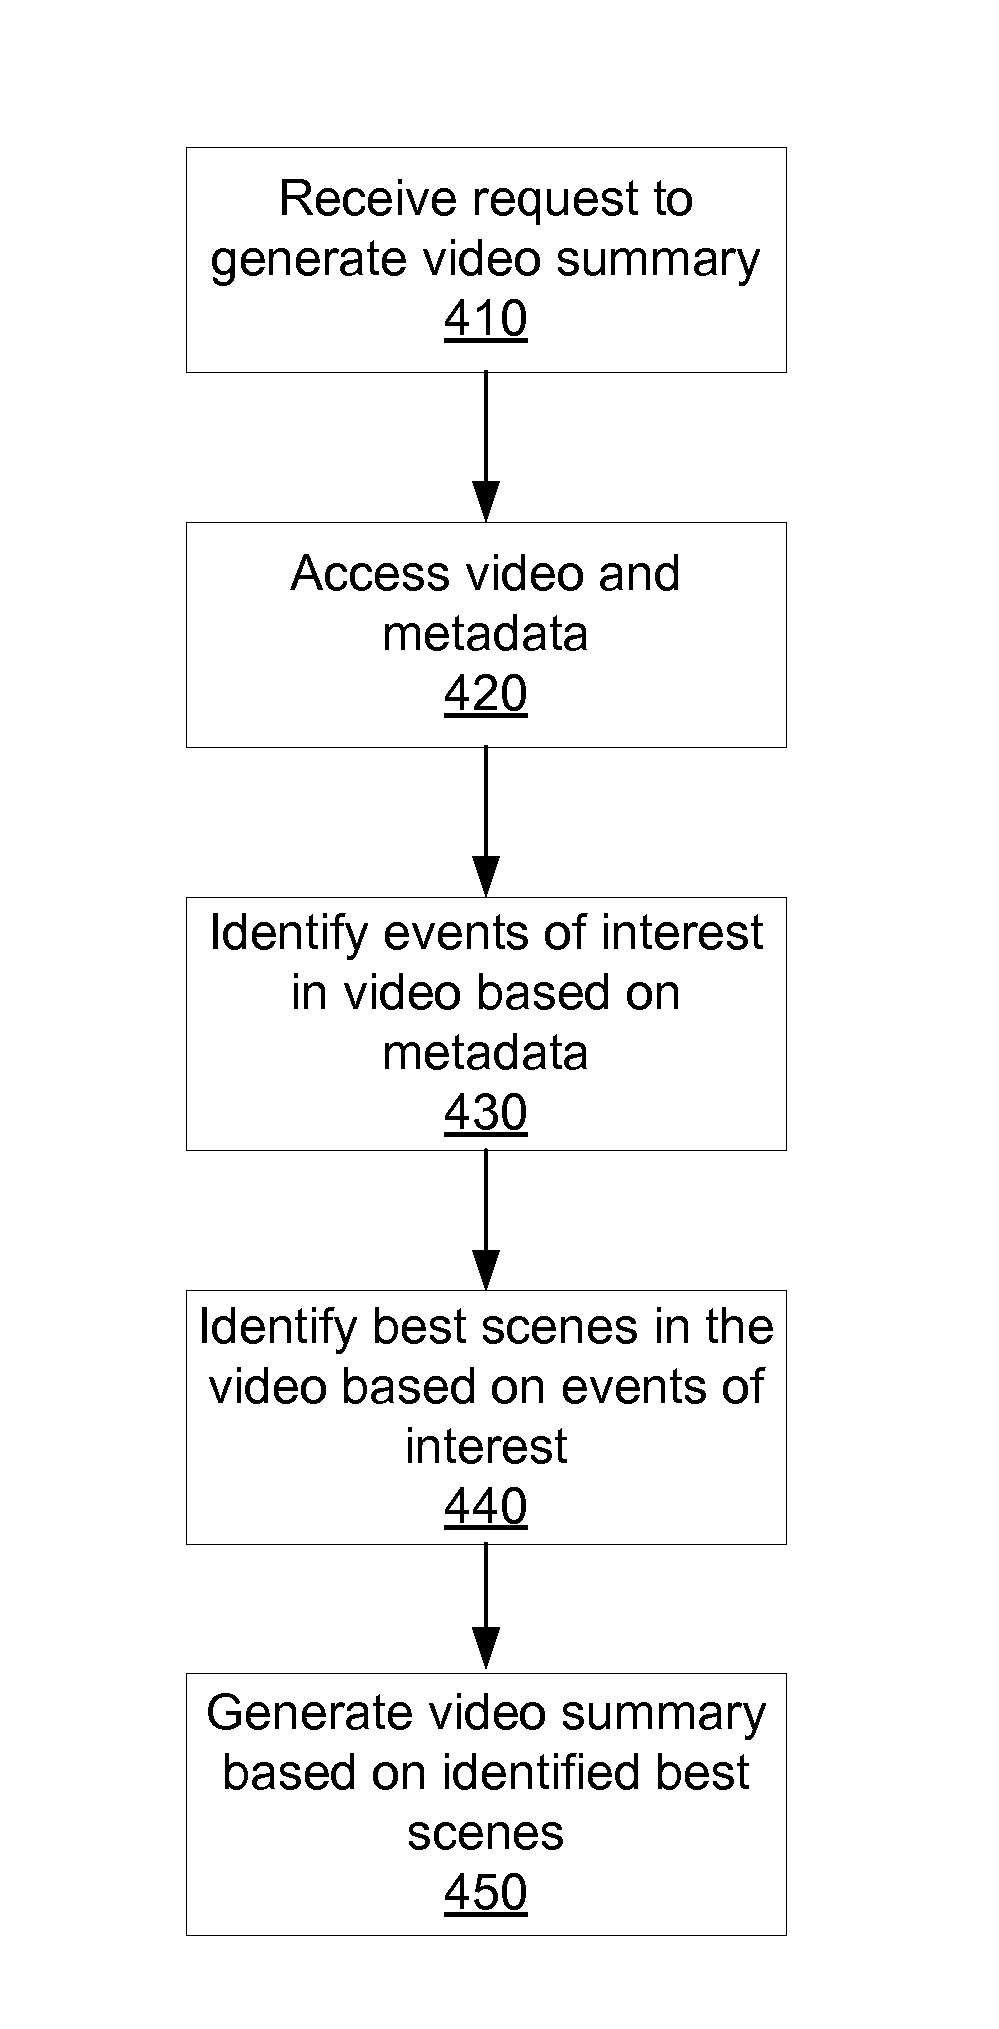 Scene and activity identification in video summary generation